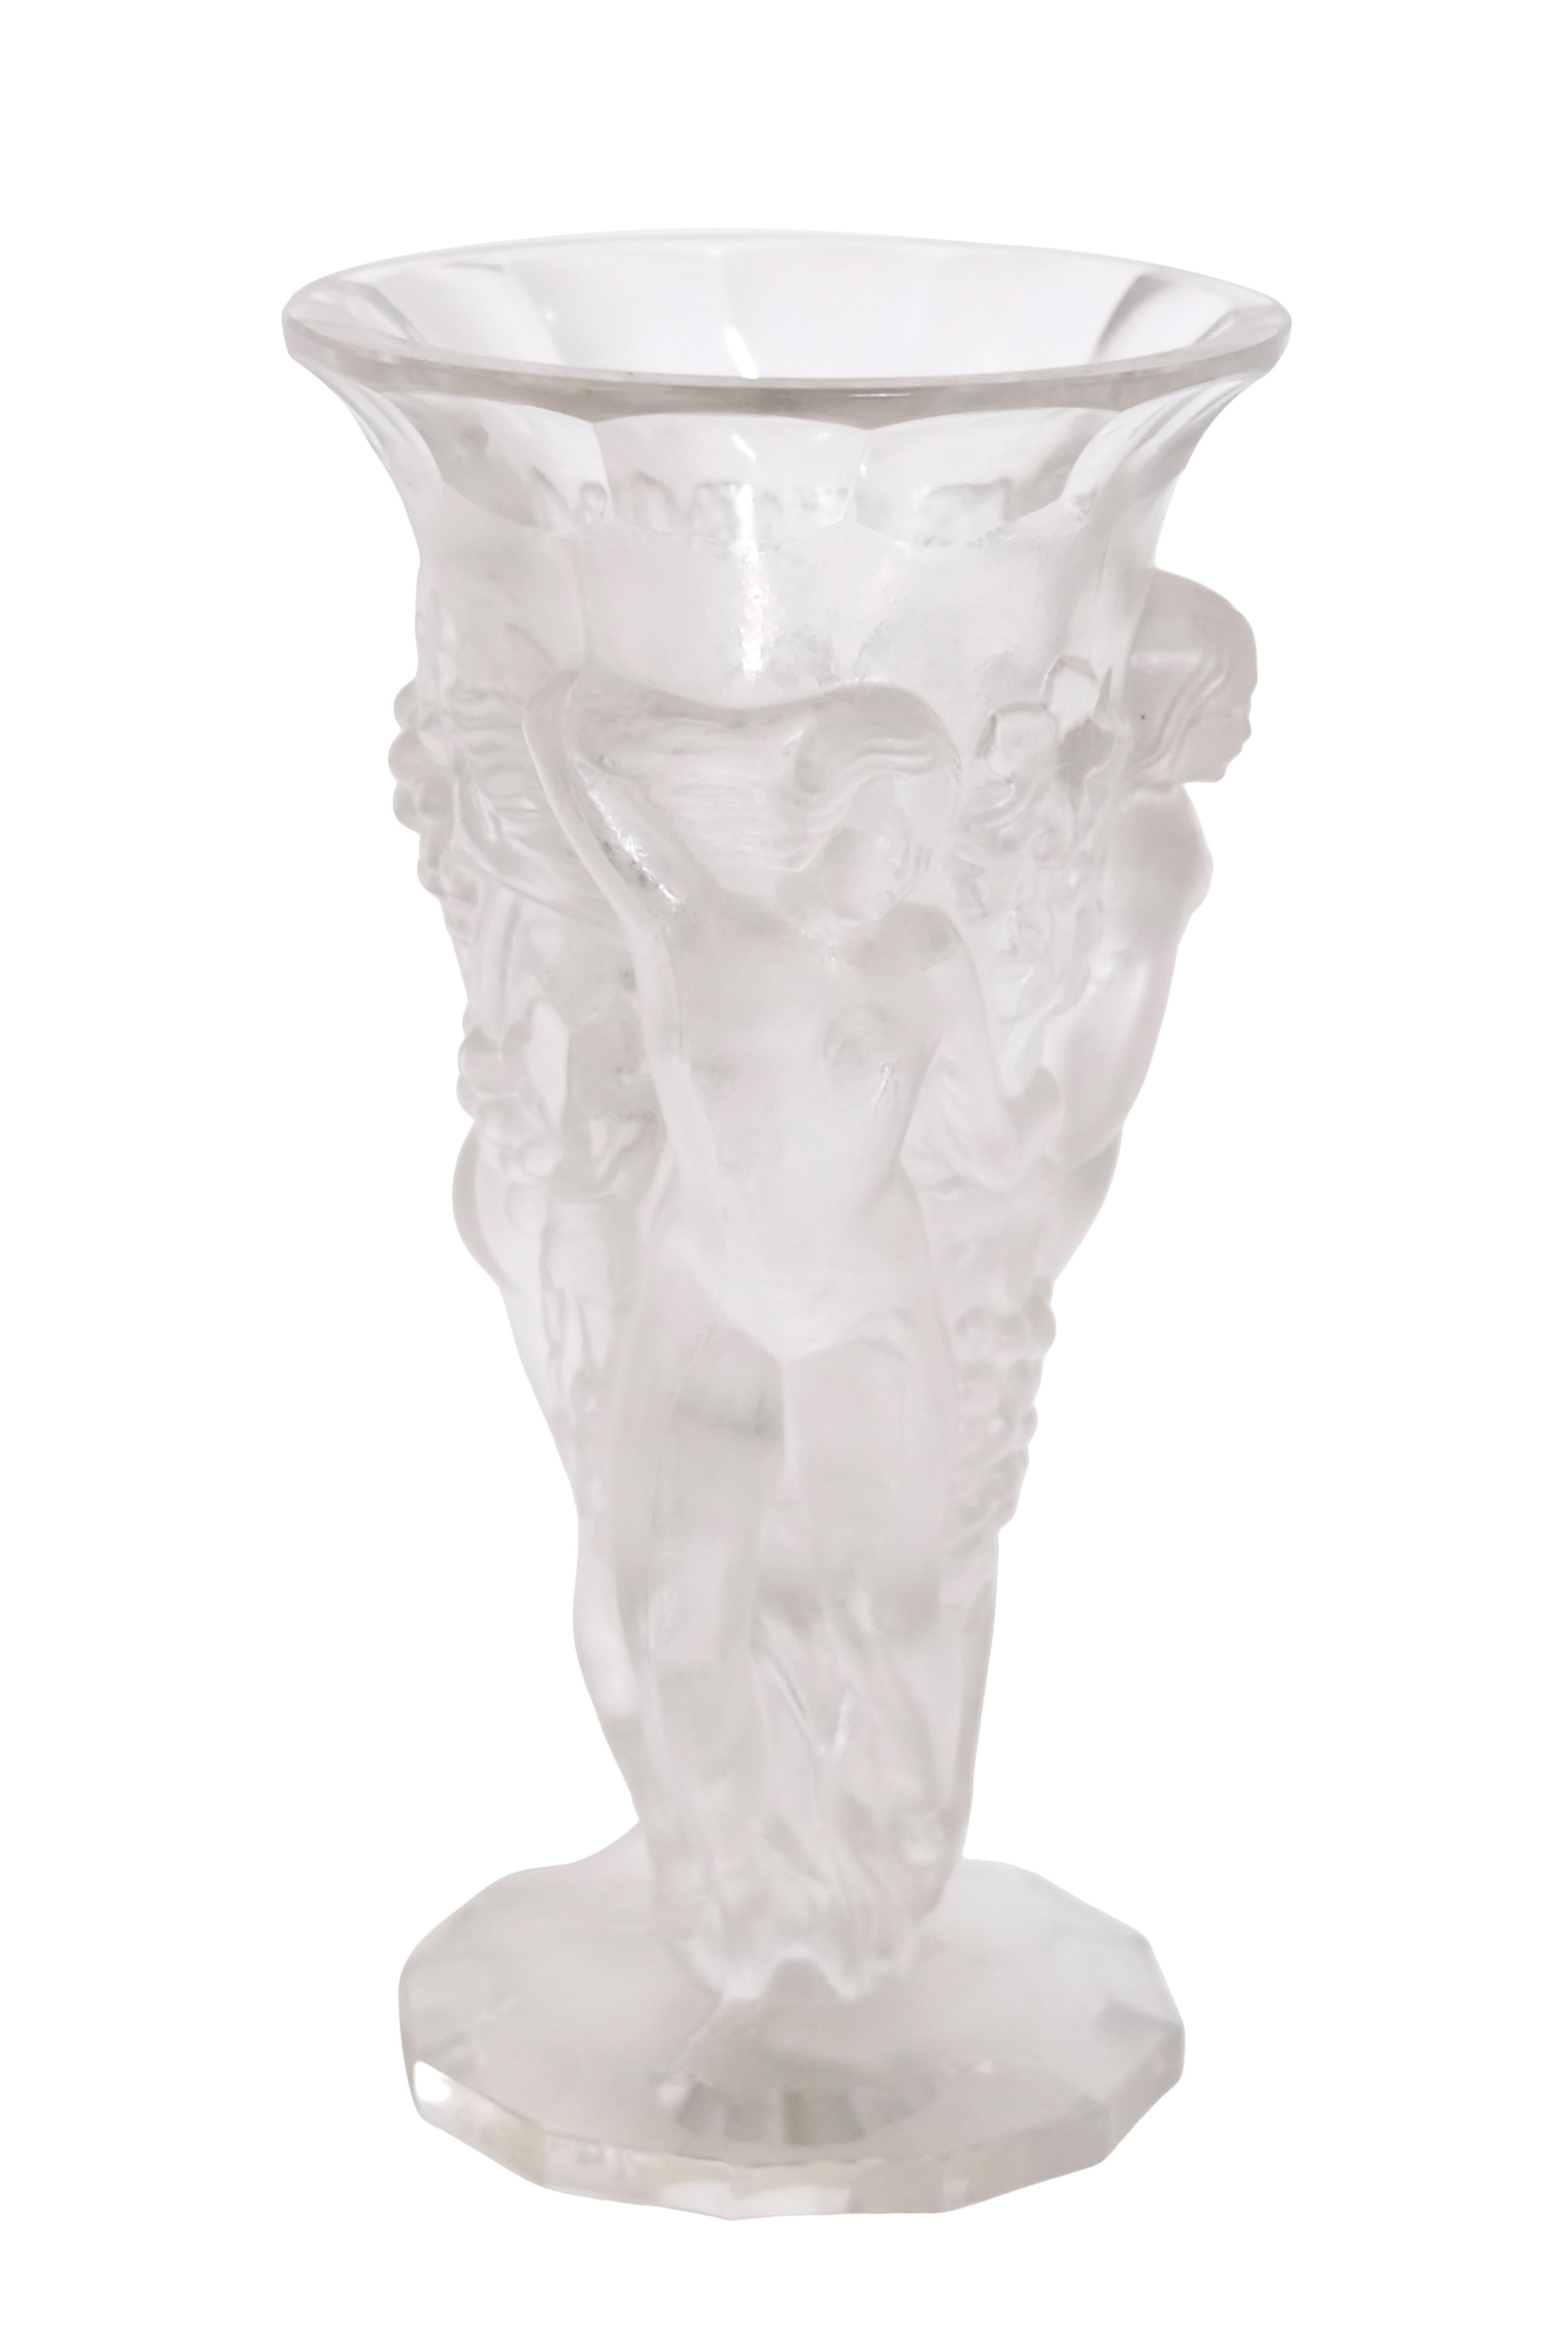 Glass vase from Verlys
Dancers decorate the vase all around

Original Art Deco, France 1920s

Dimensions:
Diameter: 12 cm
Height: 22 cm.